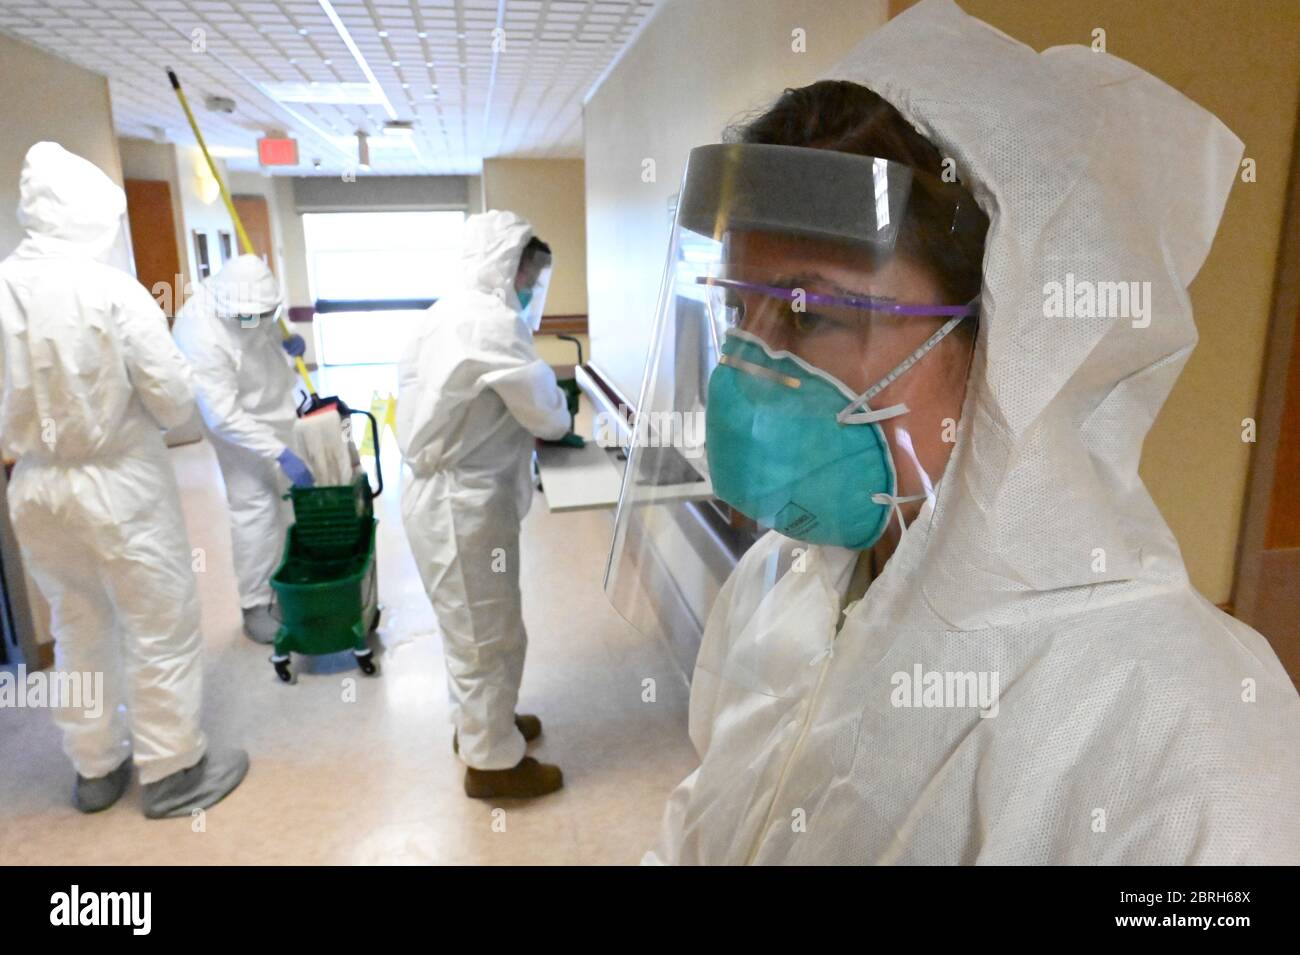 North Dakota National Guard airmen wear personal protective equipment as they sanitize a nursing home facility May 18, 2020 in Fargo, North Dakota. Stock Photo